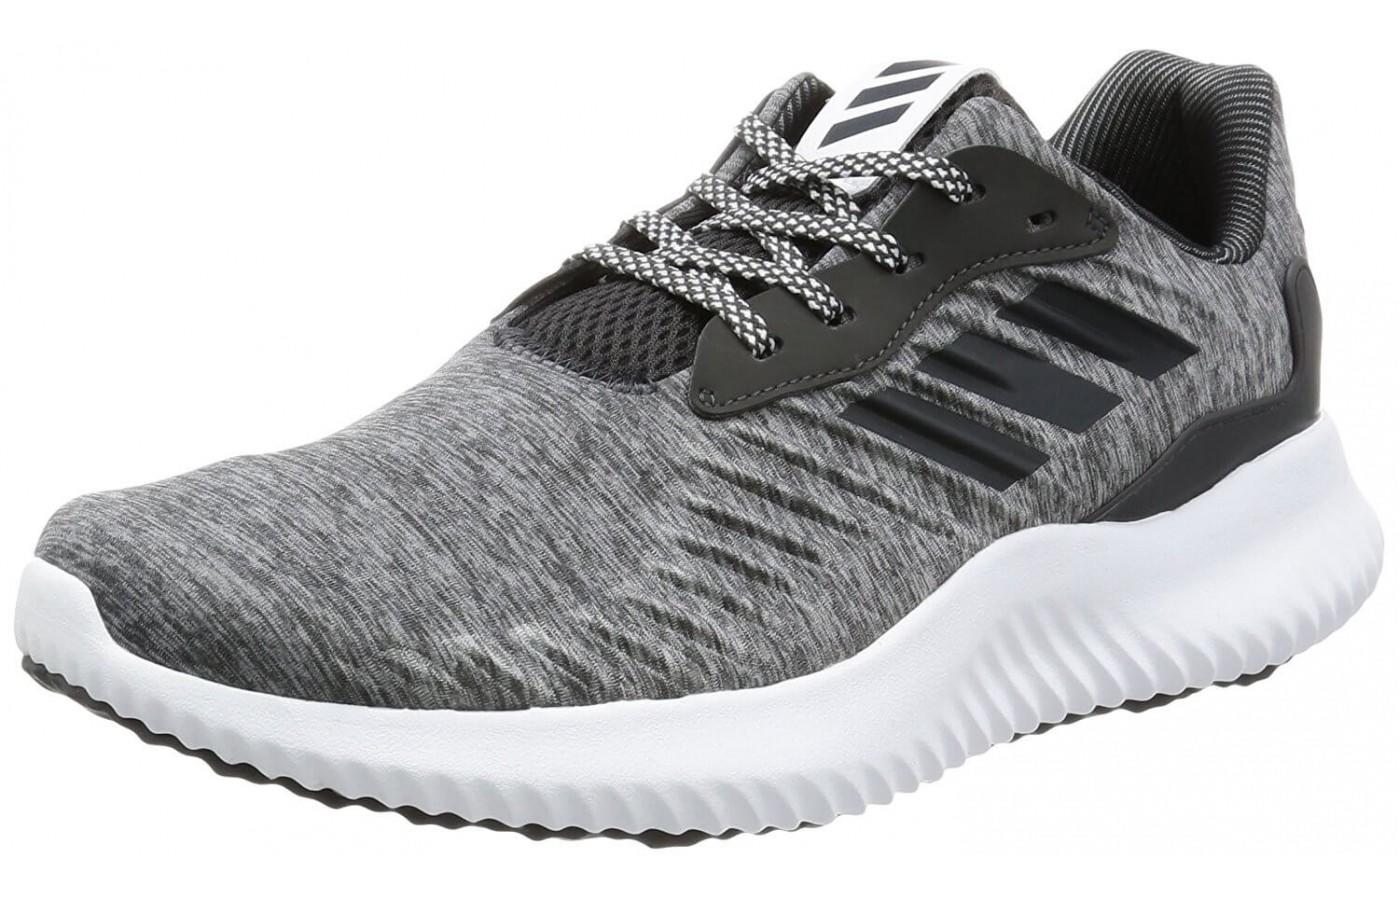 Adidas Alphabounce RC is a neutral shoe